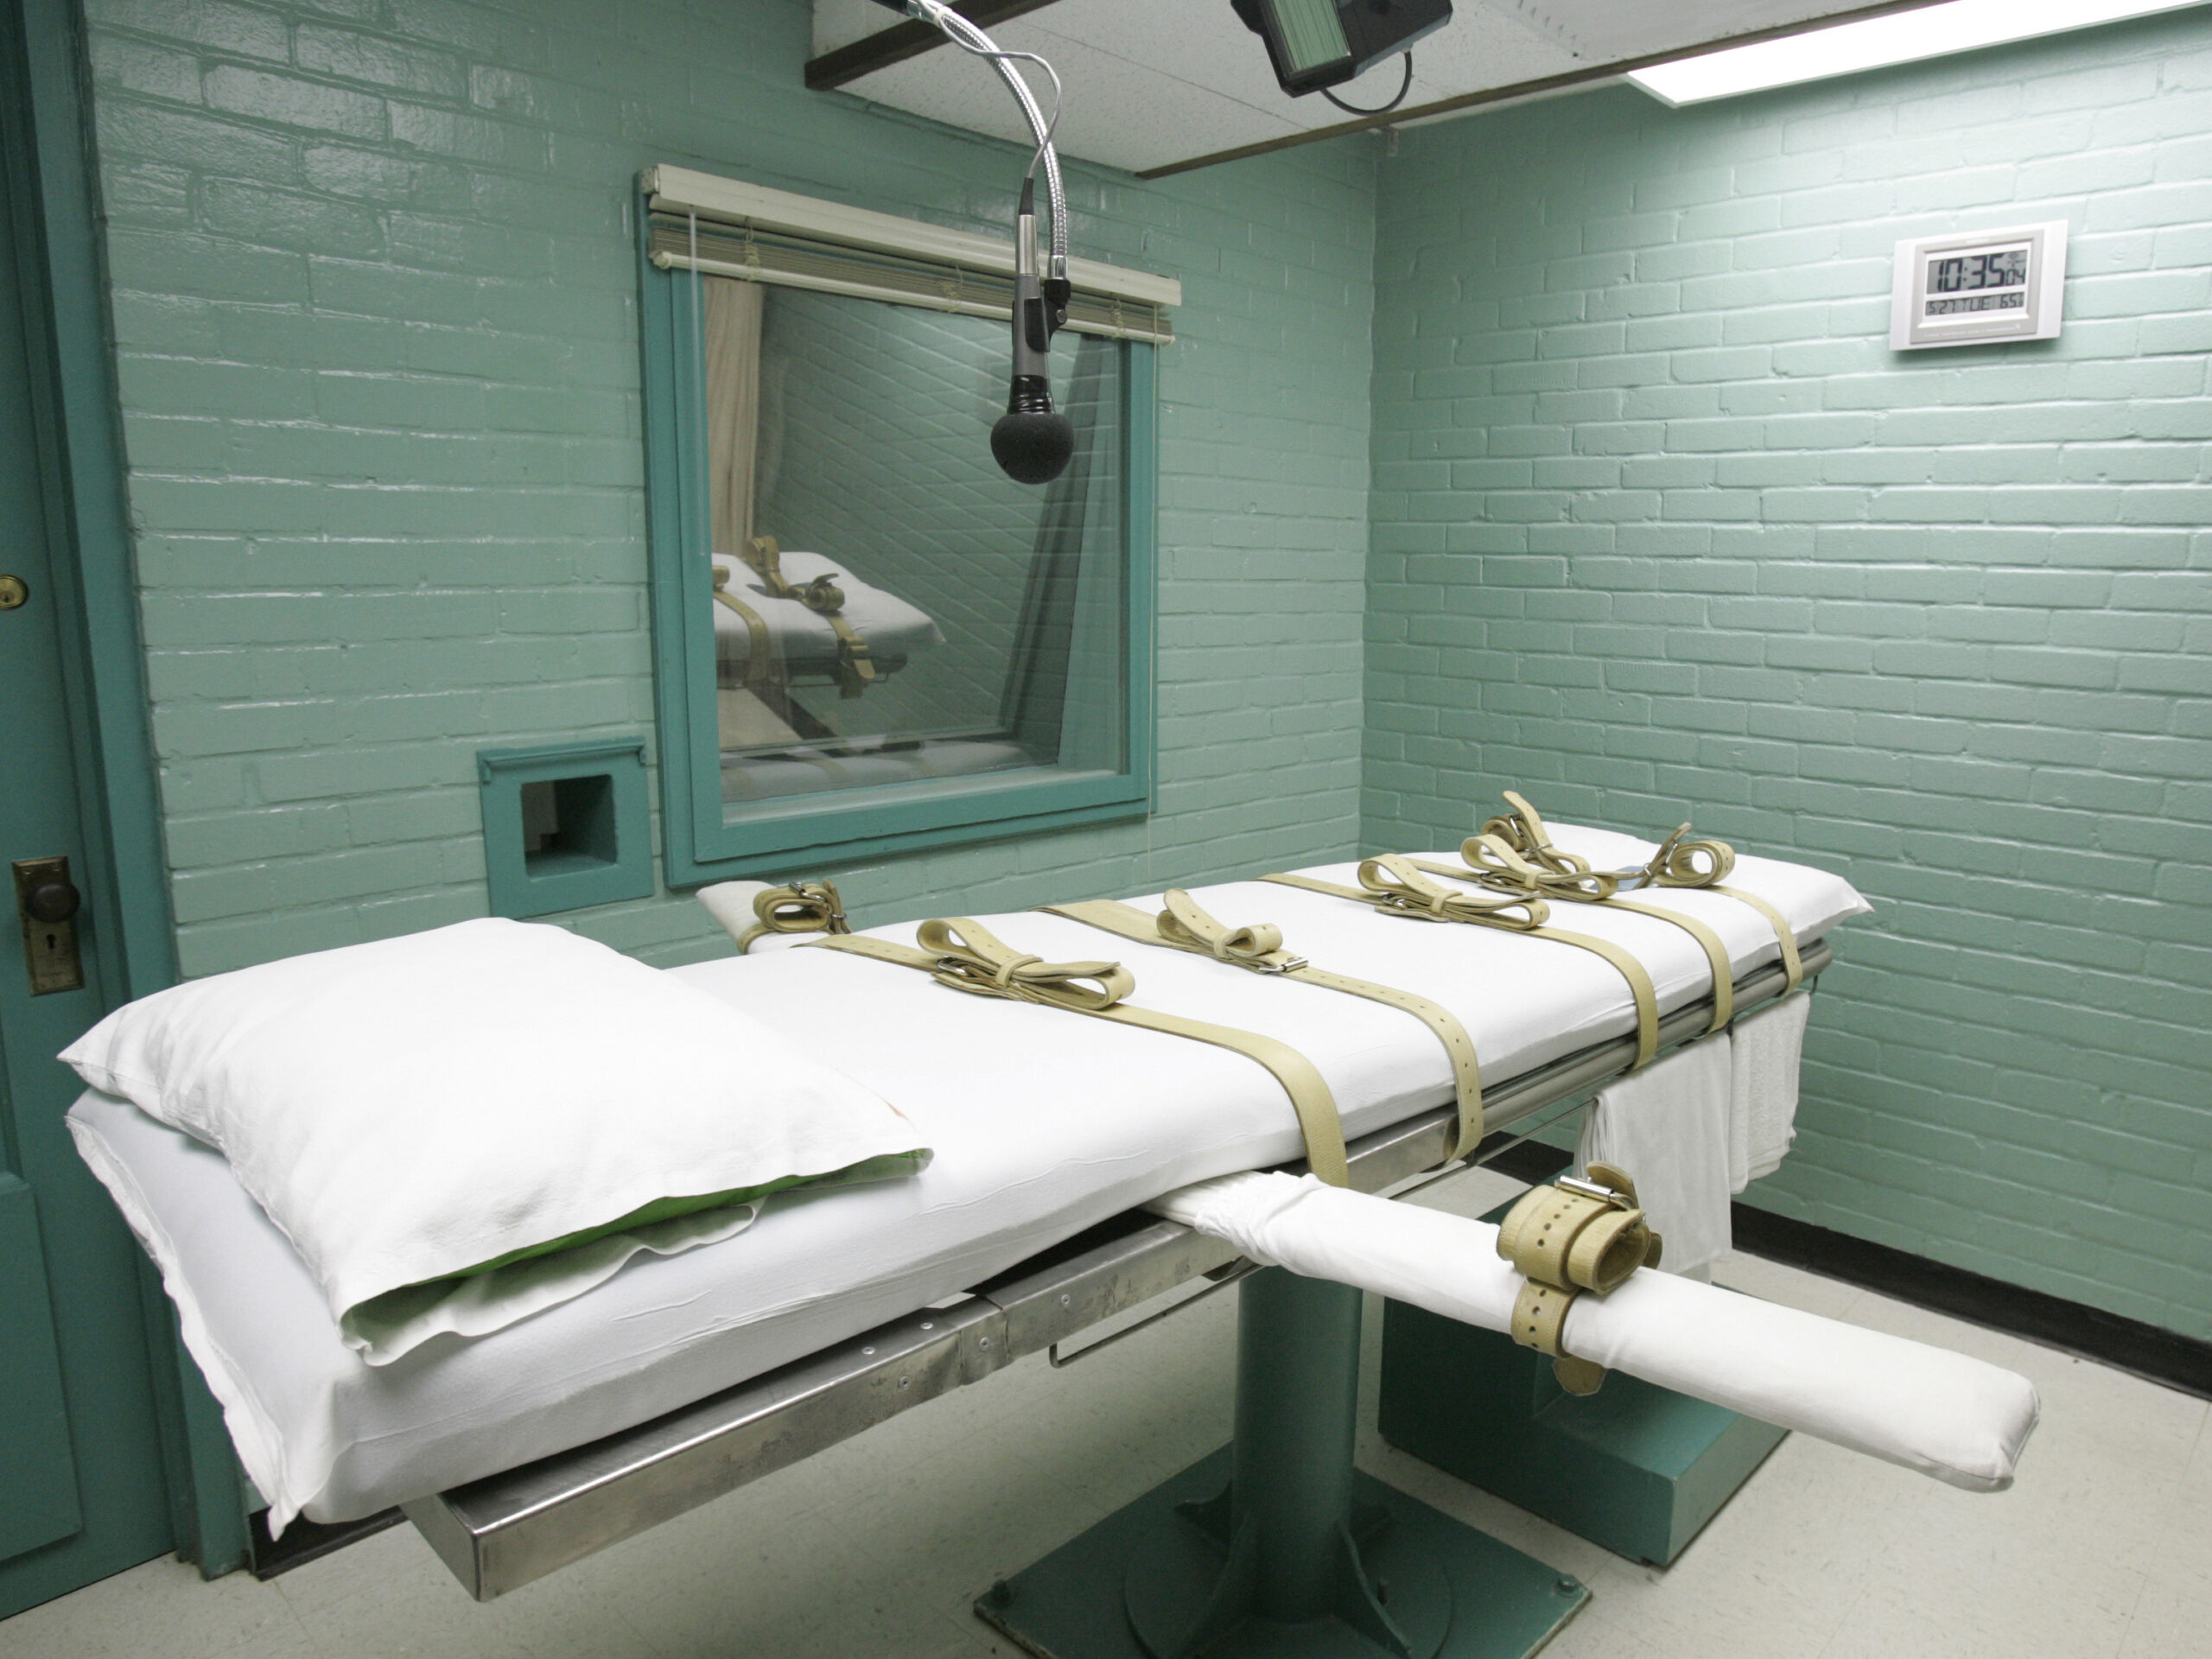 Who performs a lethal injection in the U.S.? In some states, they’re volunteers